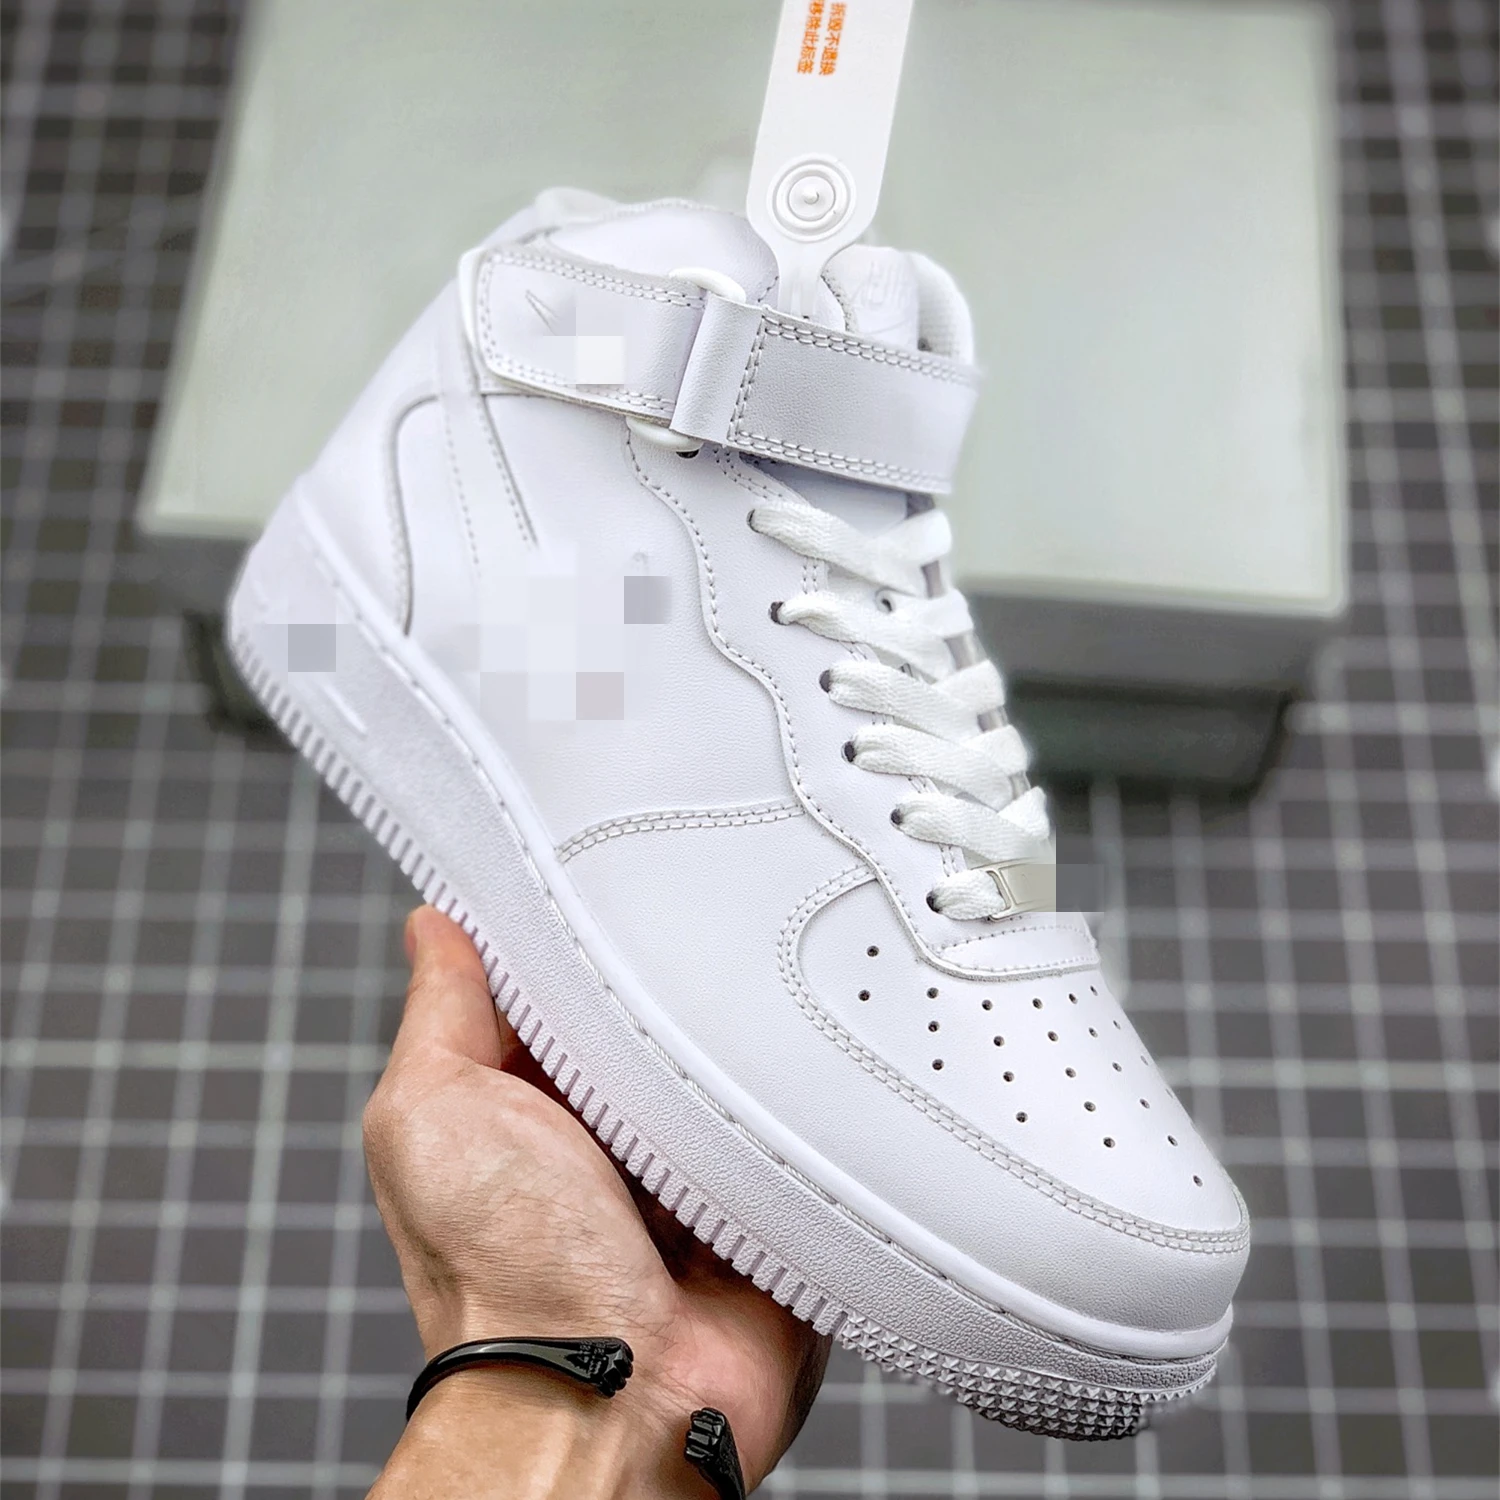 

putian Top quality Branded Fashion full White Force 1 high cut Sneakers Mens Womens Shoes sneakers